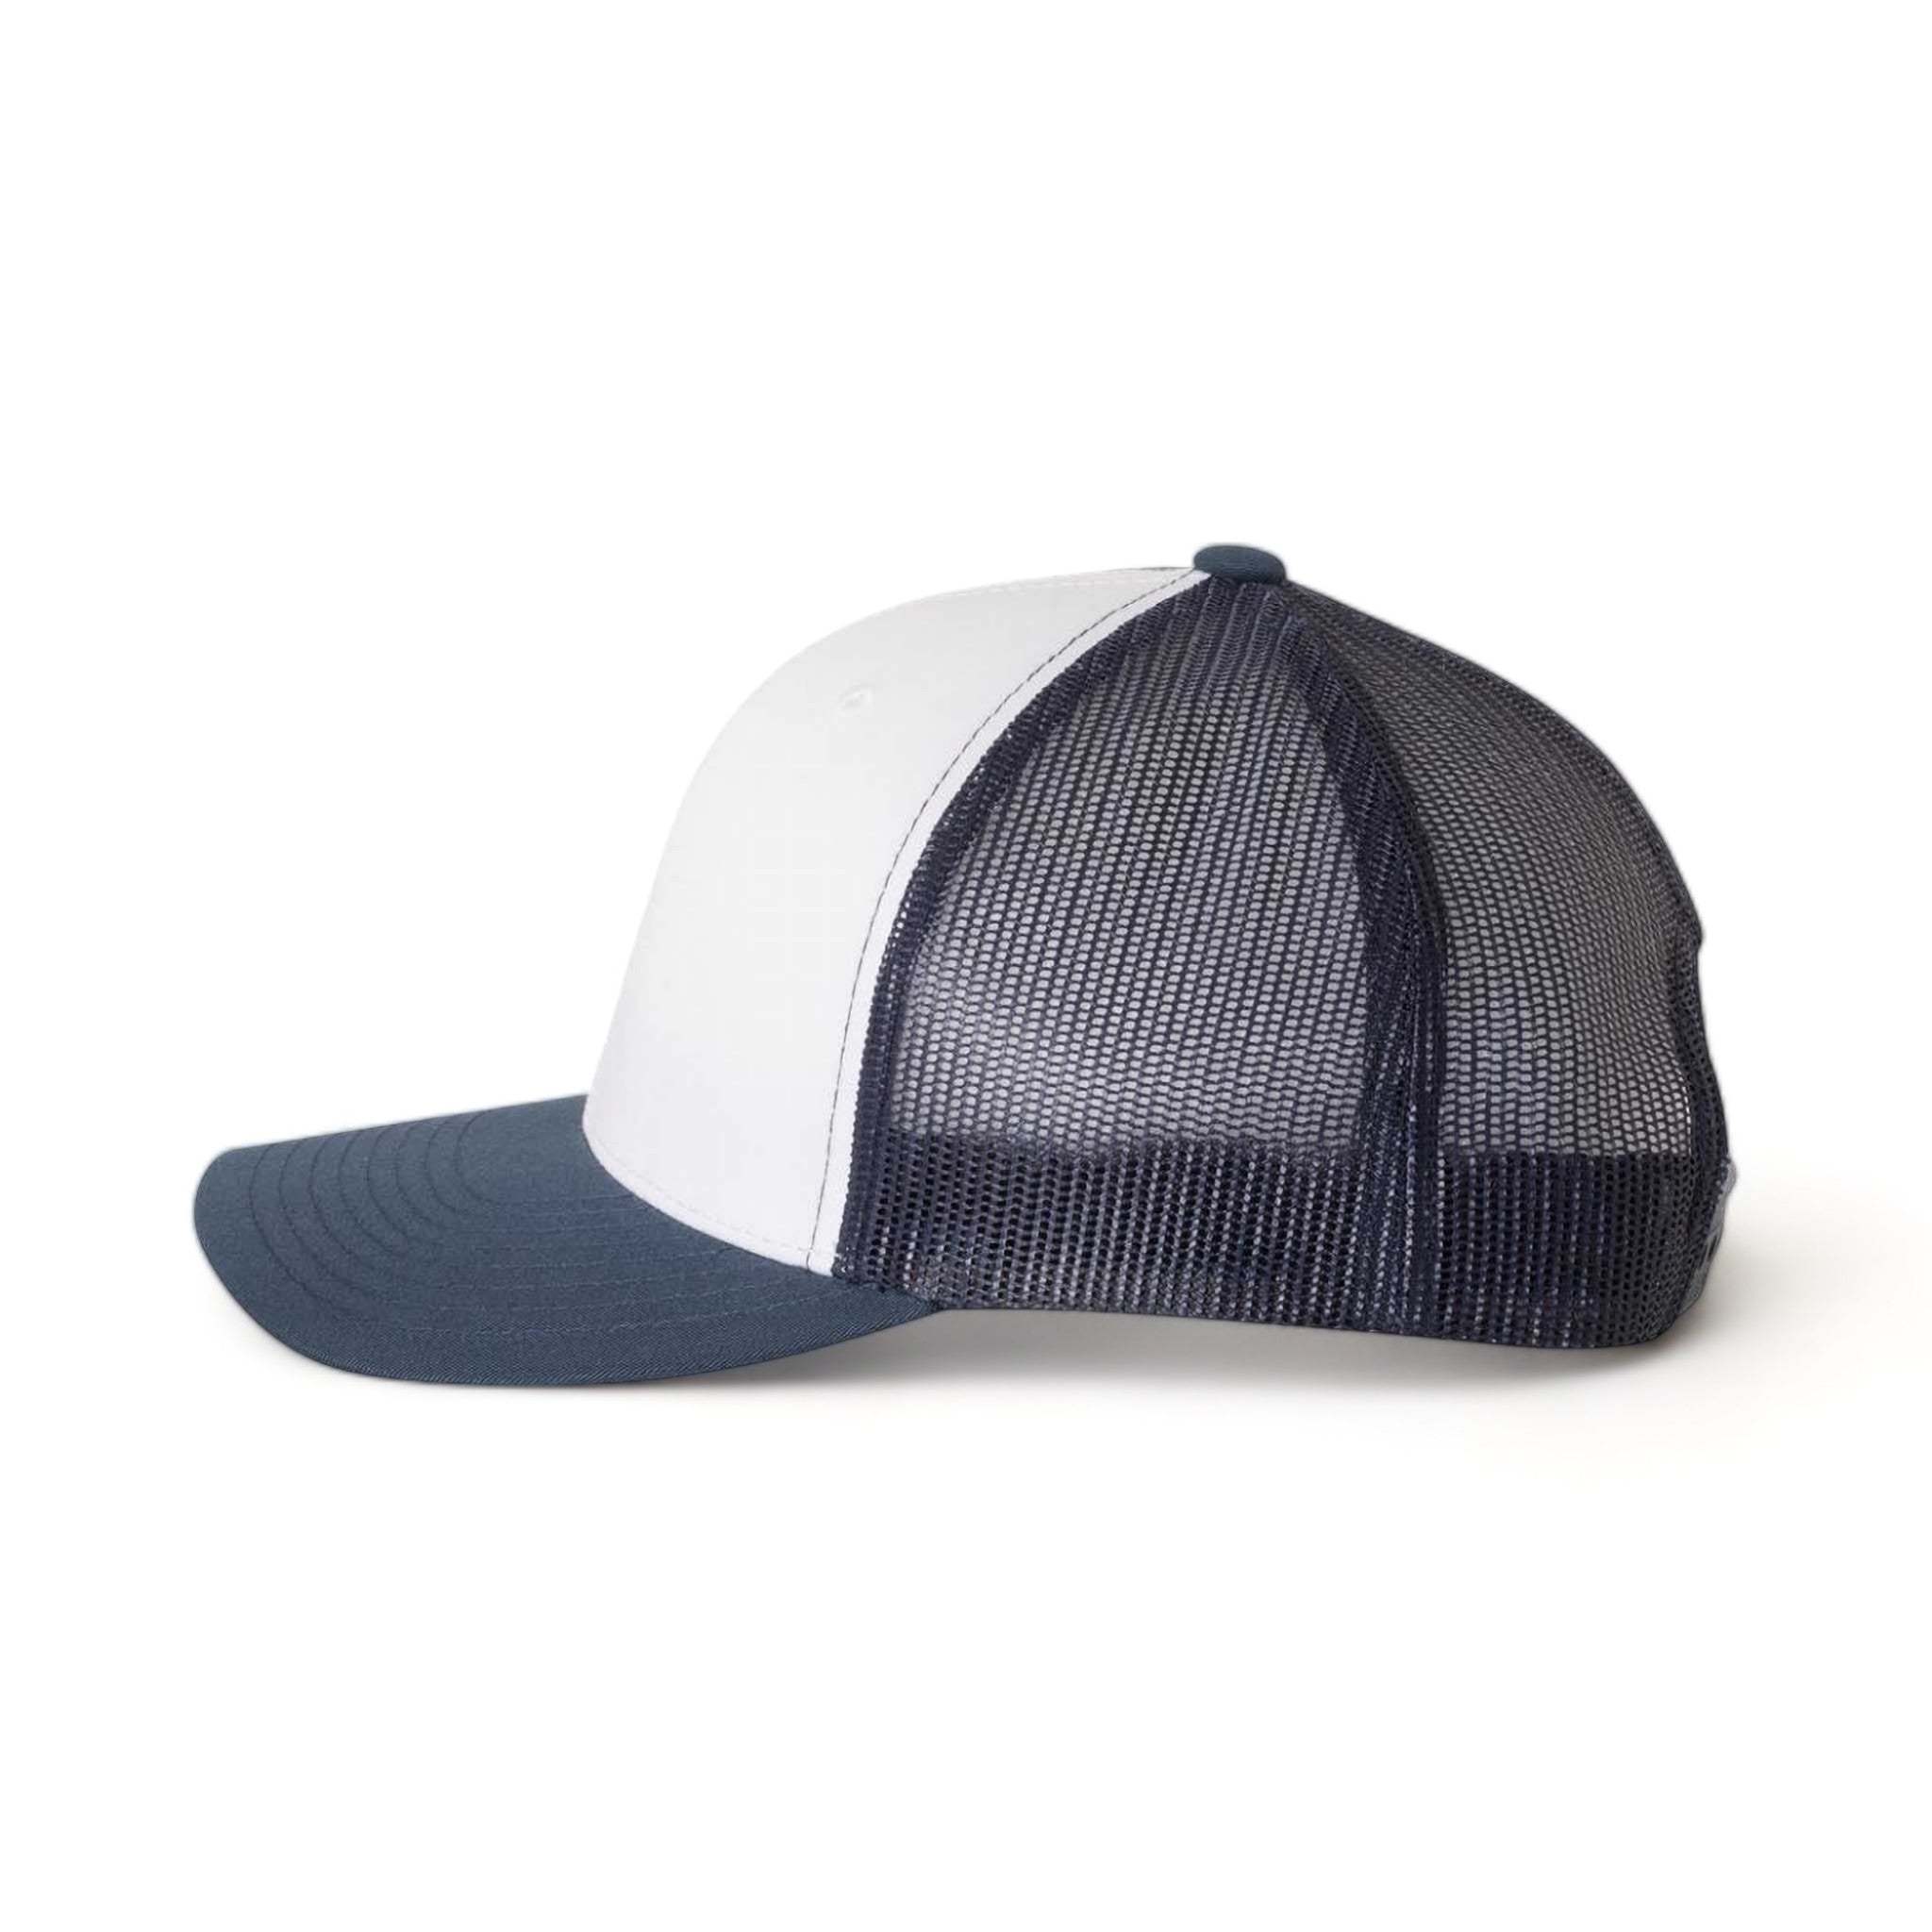 Side view of YP Classics 6606 custom hat in navy,  white and navy